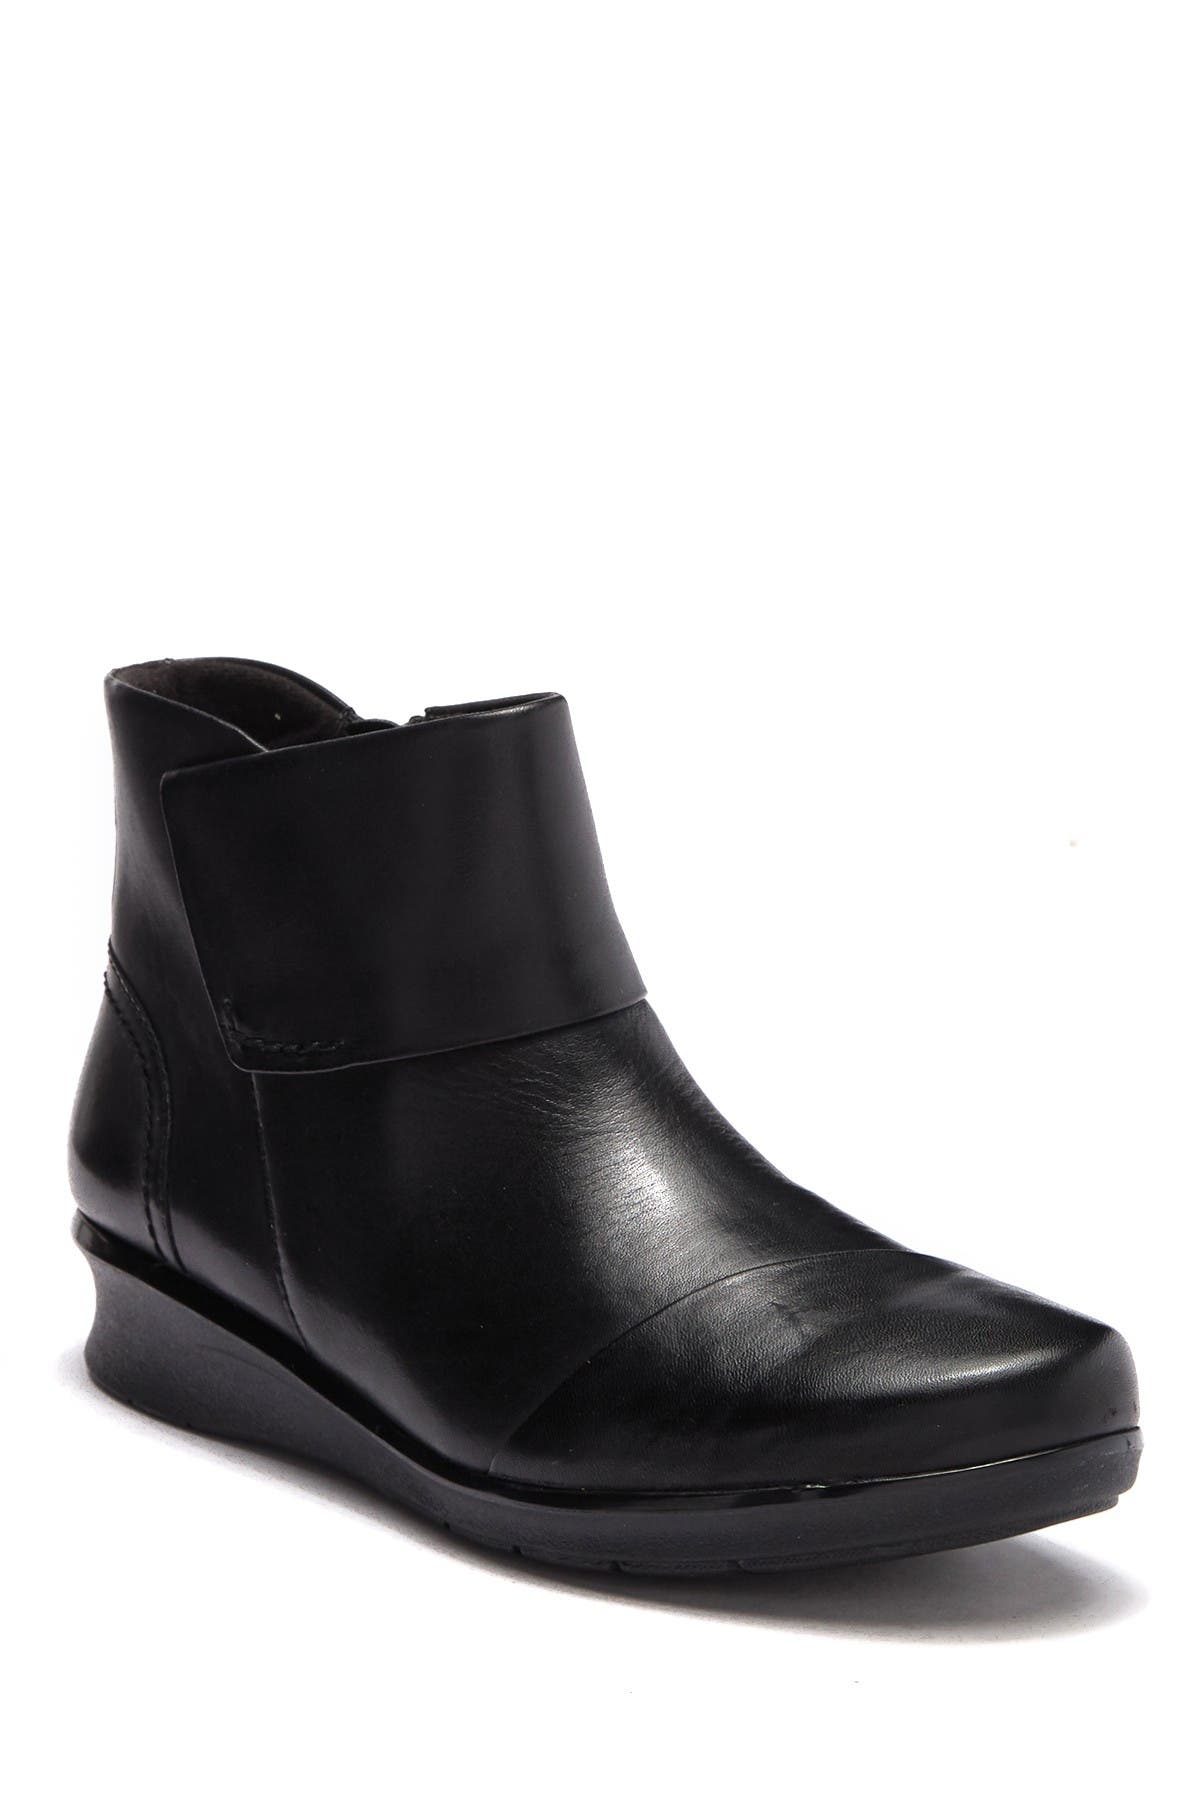 clarks hope track leather ankle boots